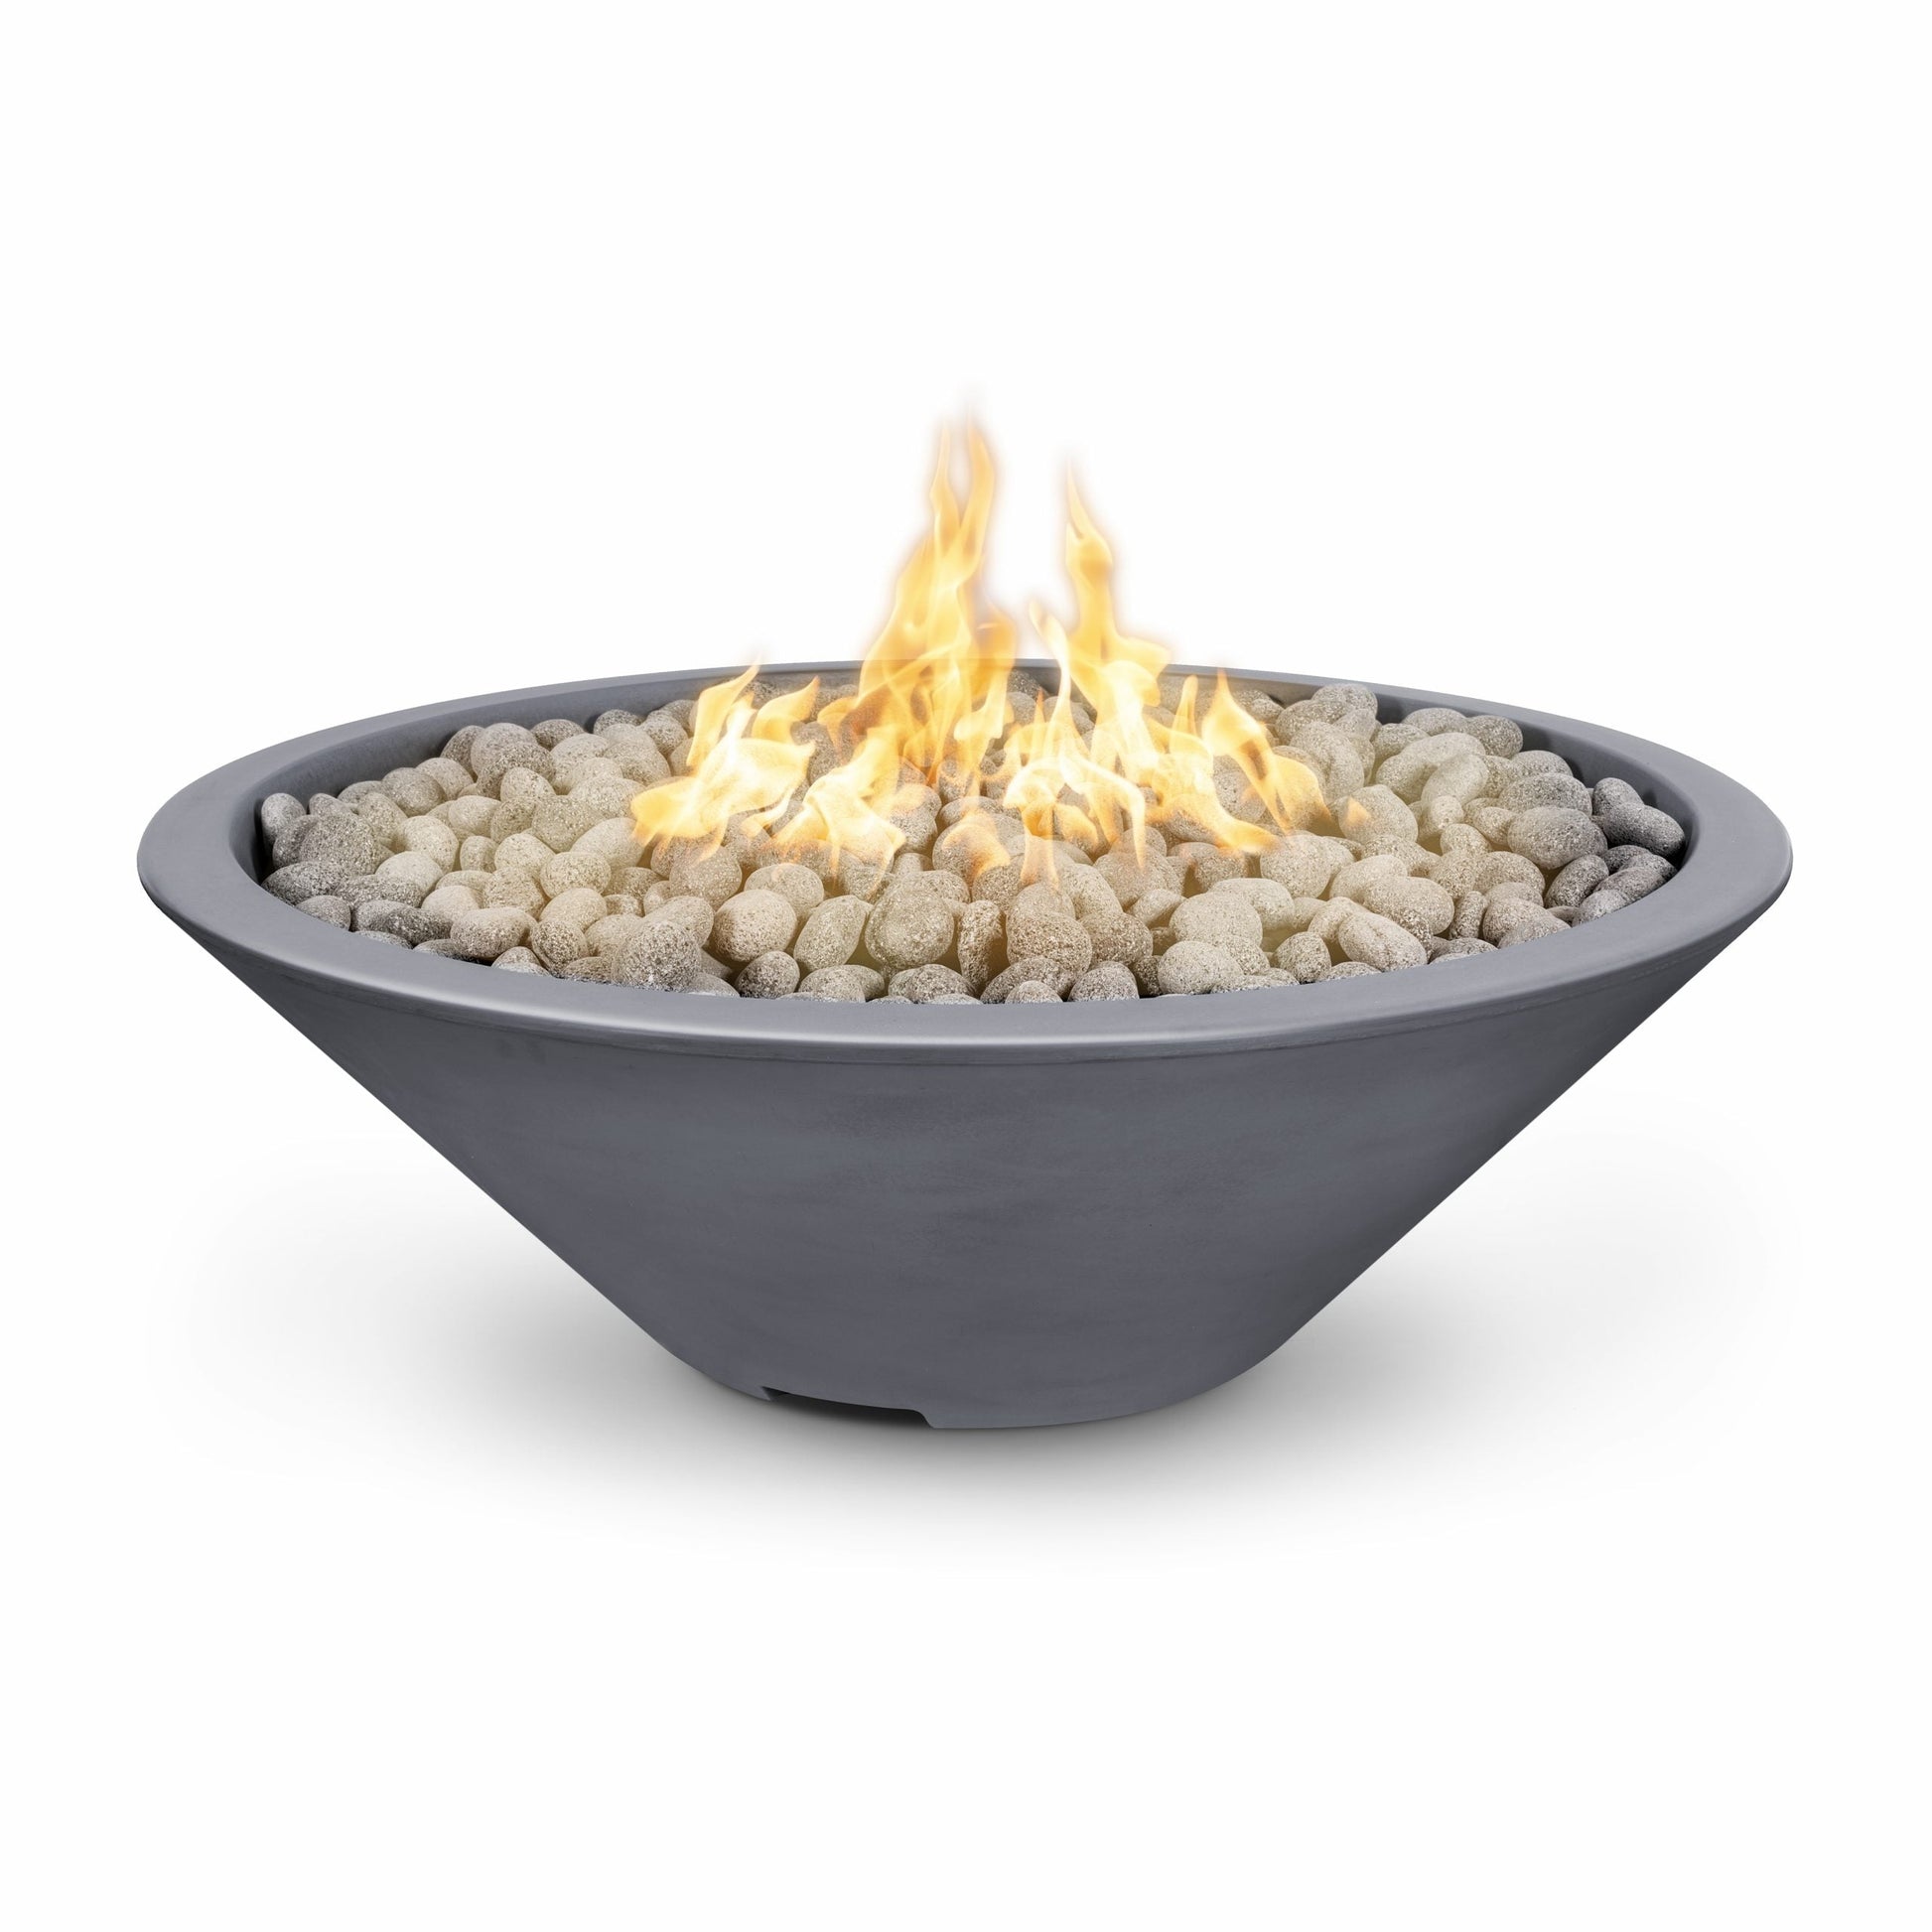 The Outdoor Plus Round Cazo 60" Copper Vein Powder Coated Metal Liquid Propane Fire Pit with 110V Electronic Ignition